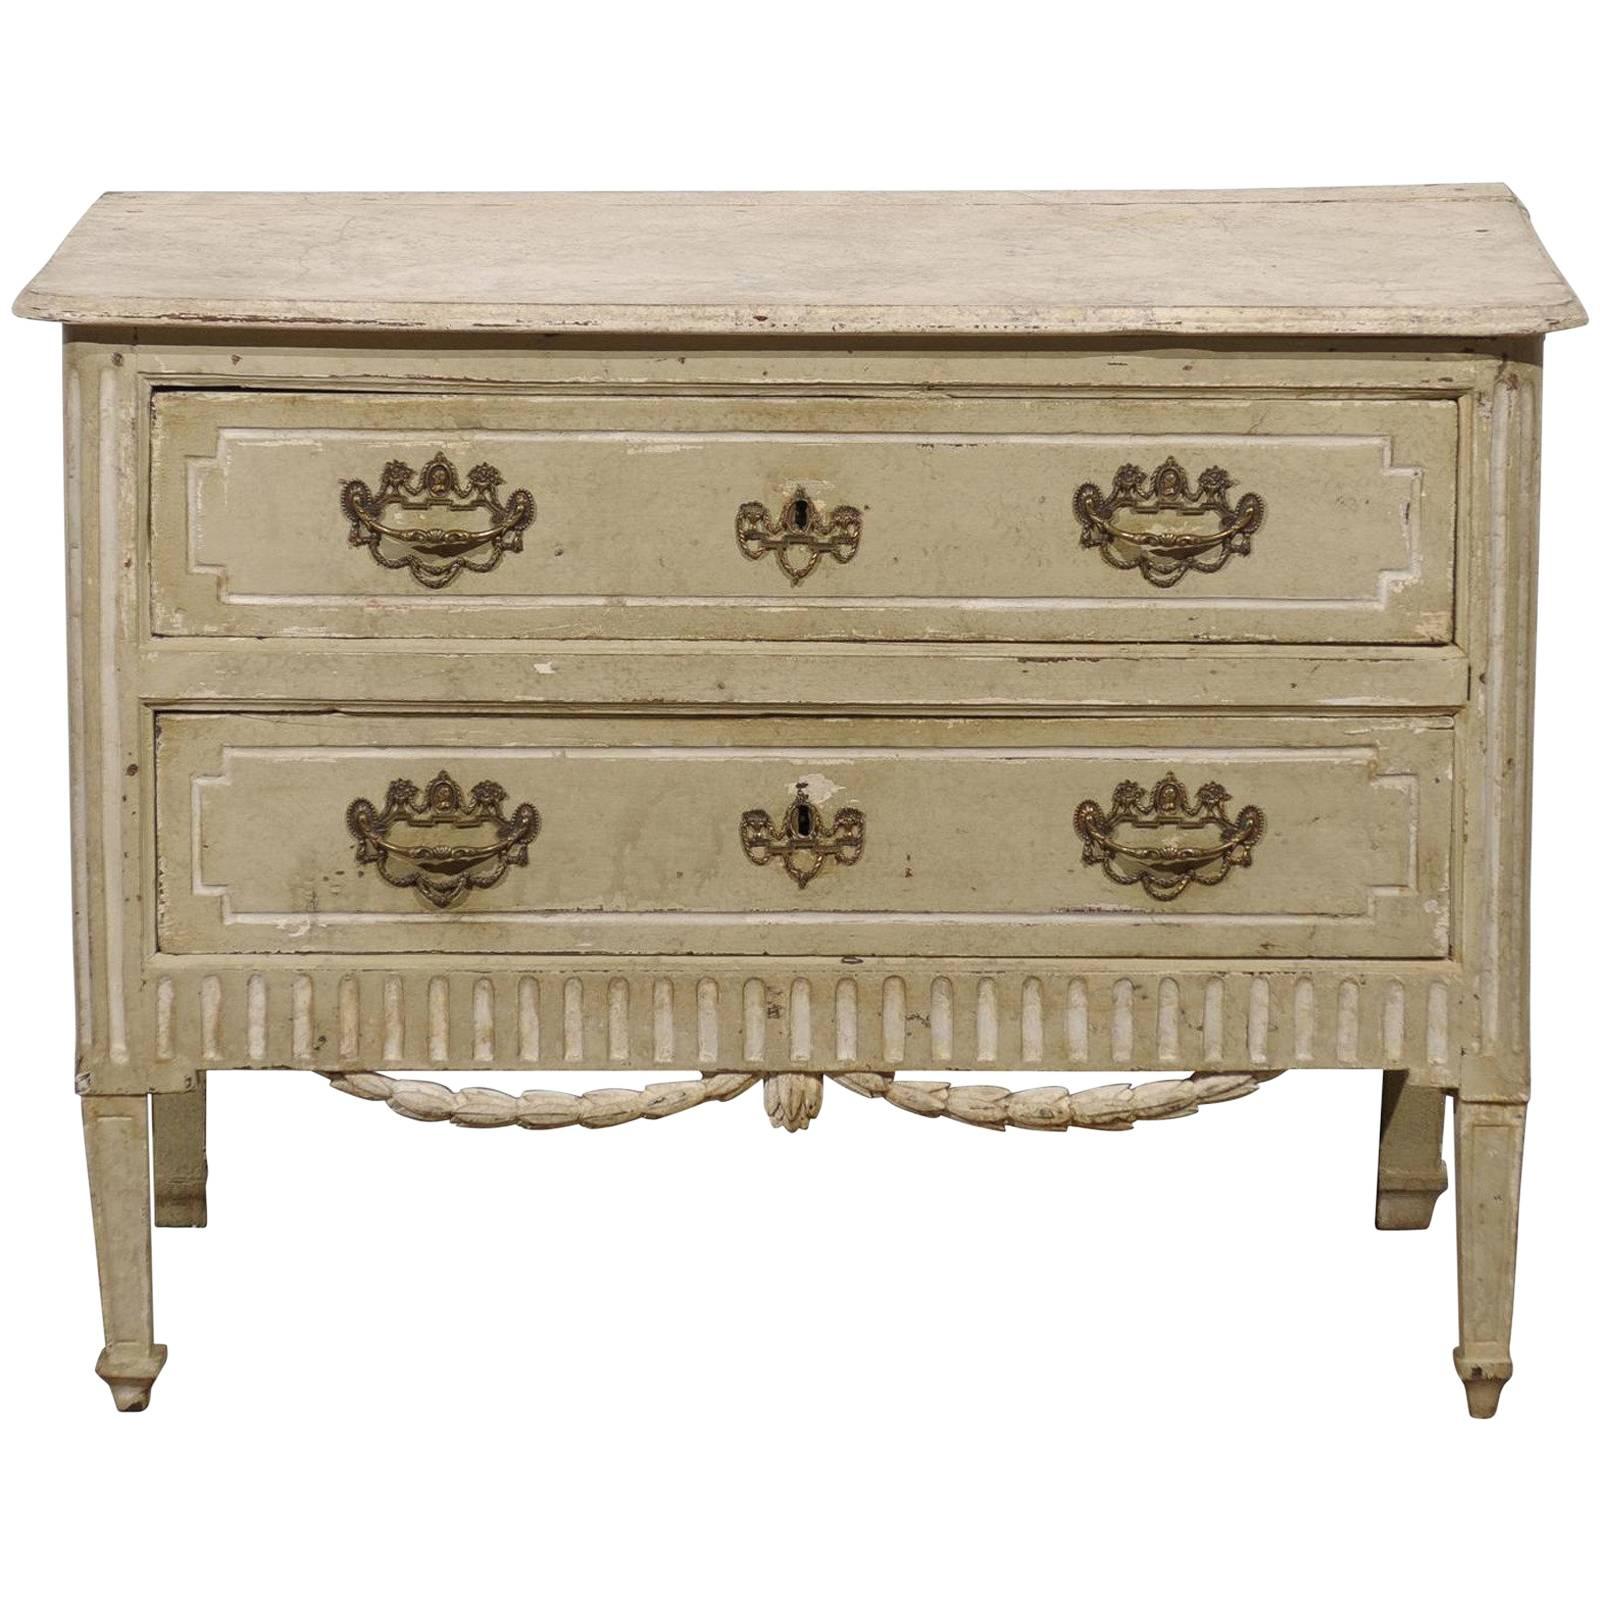 French Period Louis XVI Two-Drawer Commode with Carved Swag, circa 1780-1790